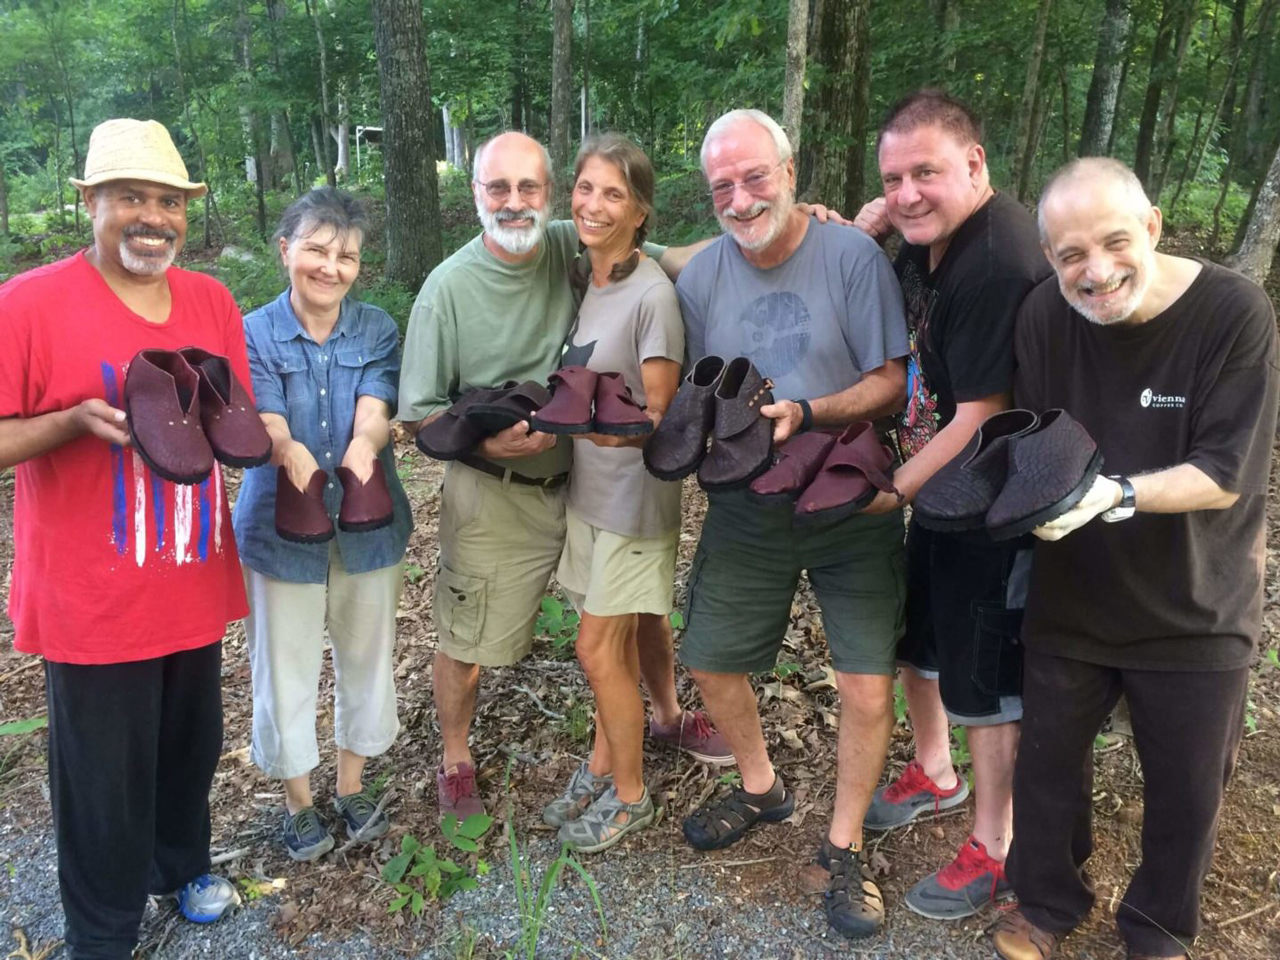 A diverse group of students in the woods near Appomattax, Virginia pose with their new handmade shoes